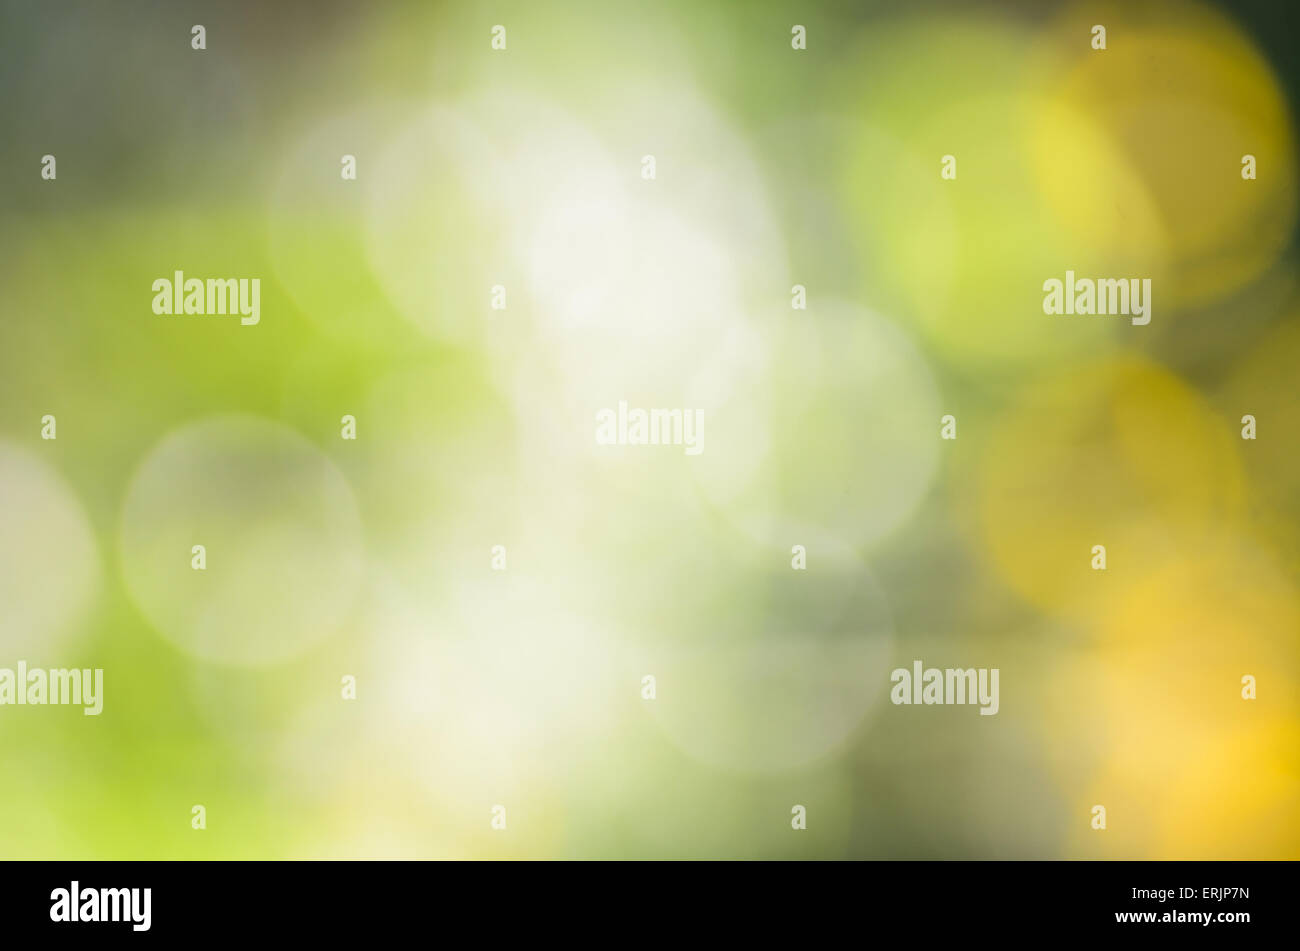 abstract green nature defocus background Stock Photo